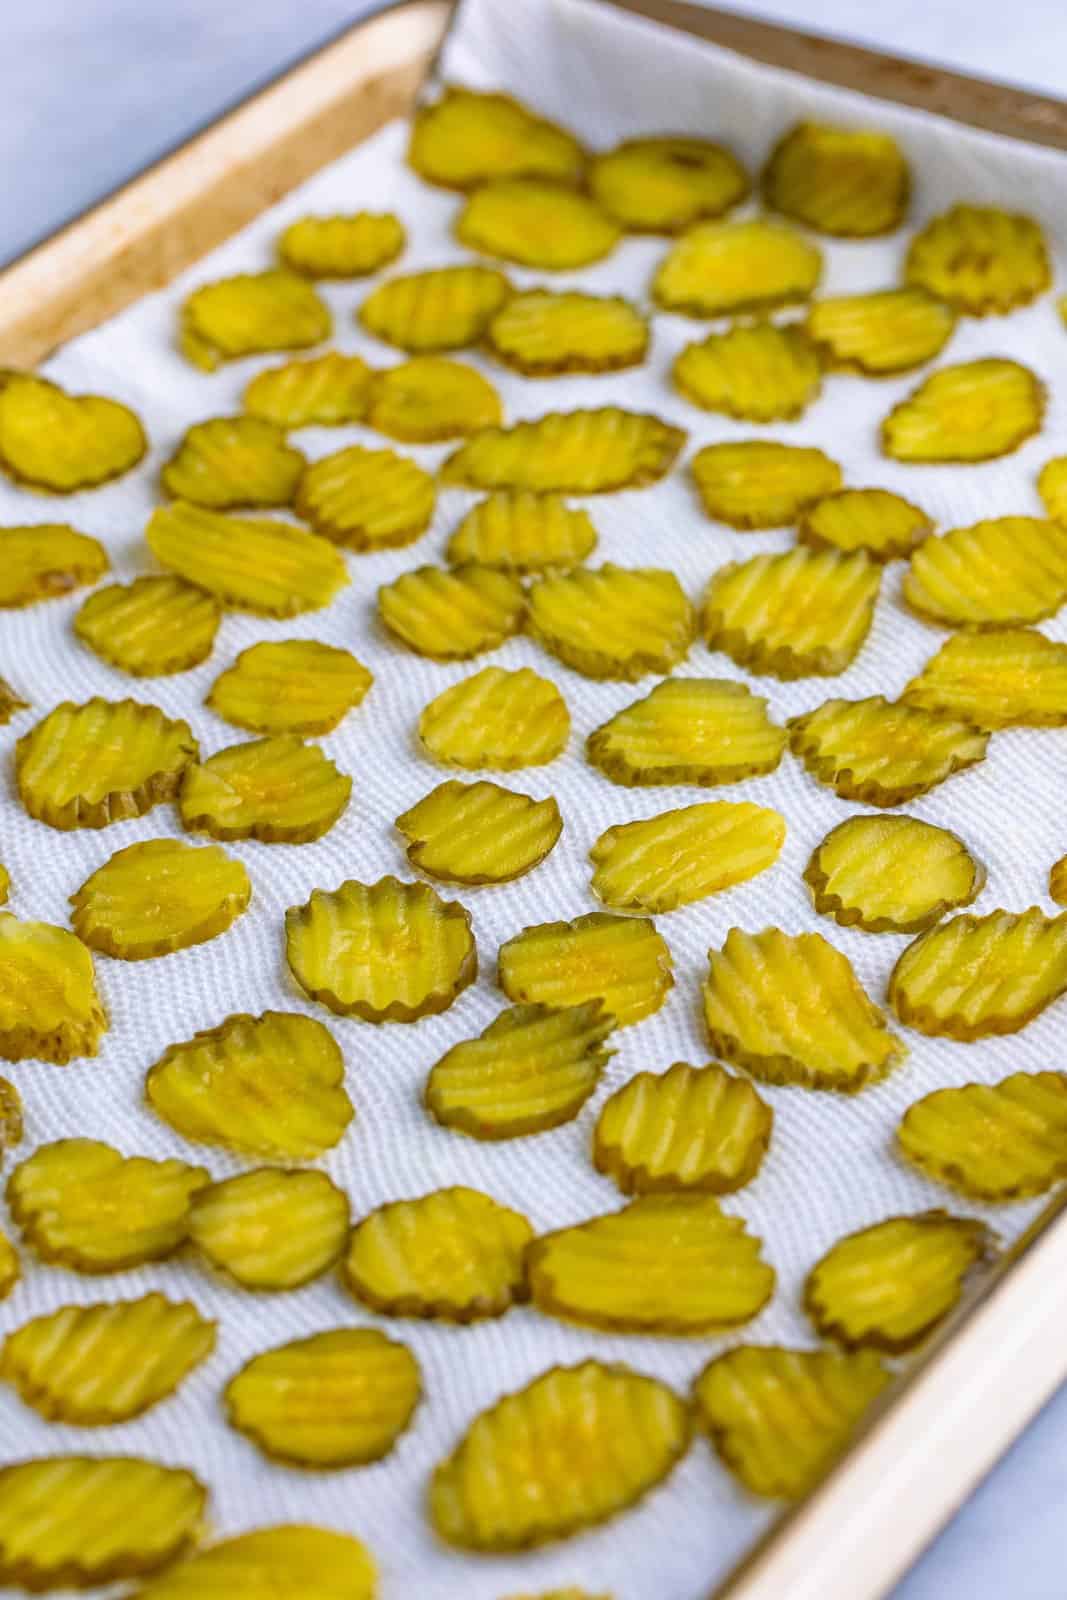 Pickles drying on paper towel.